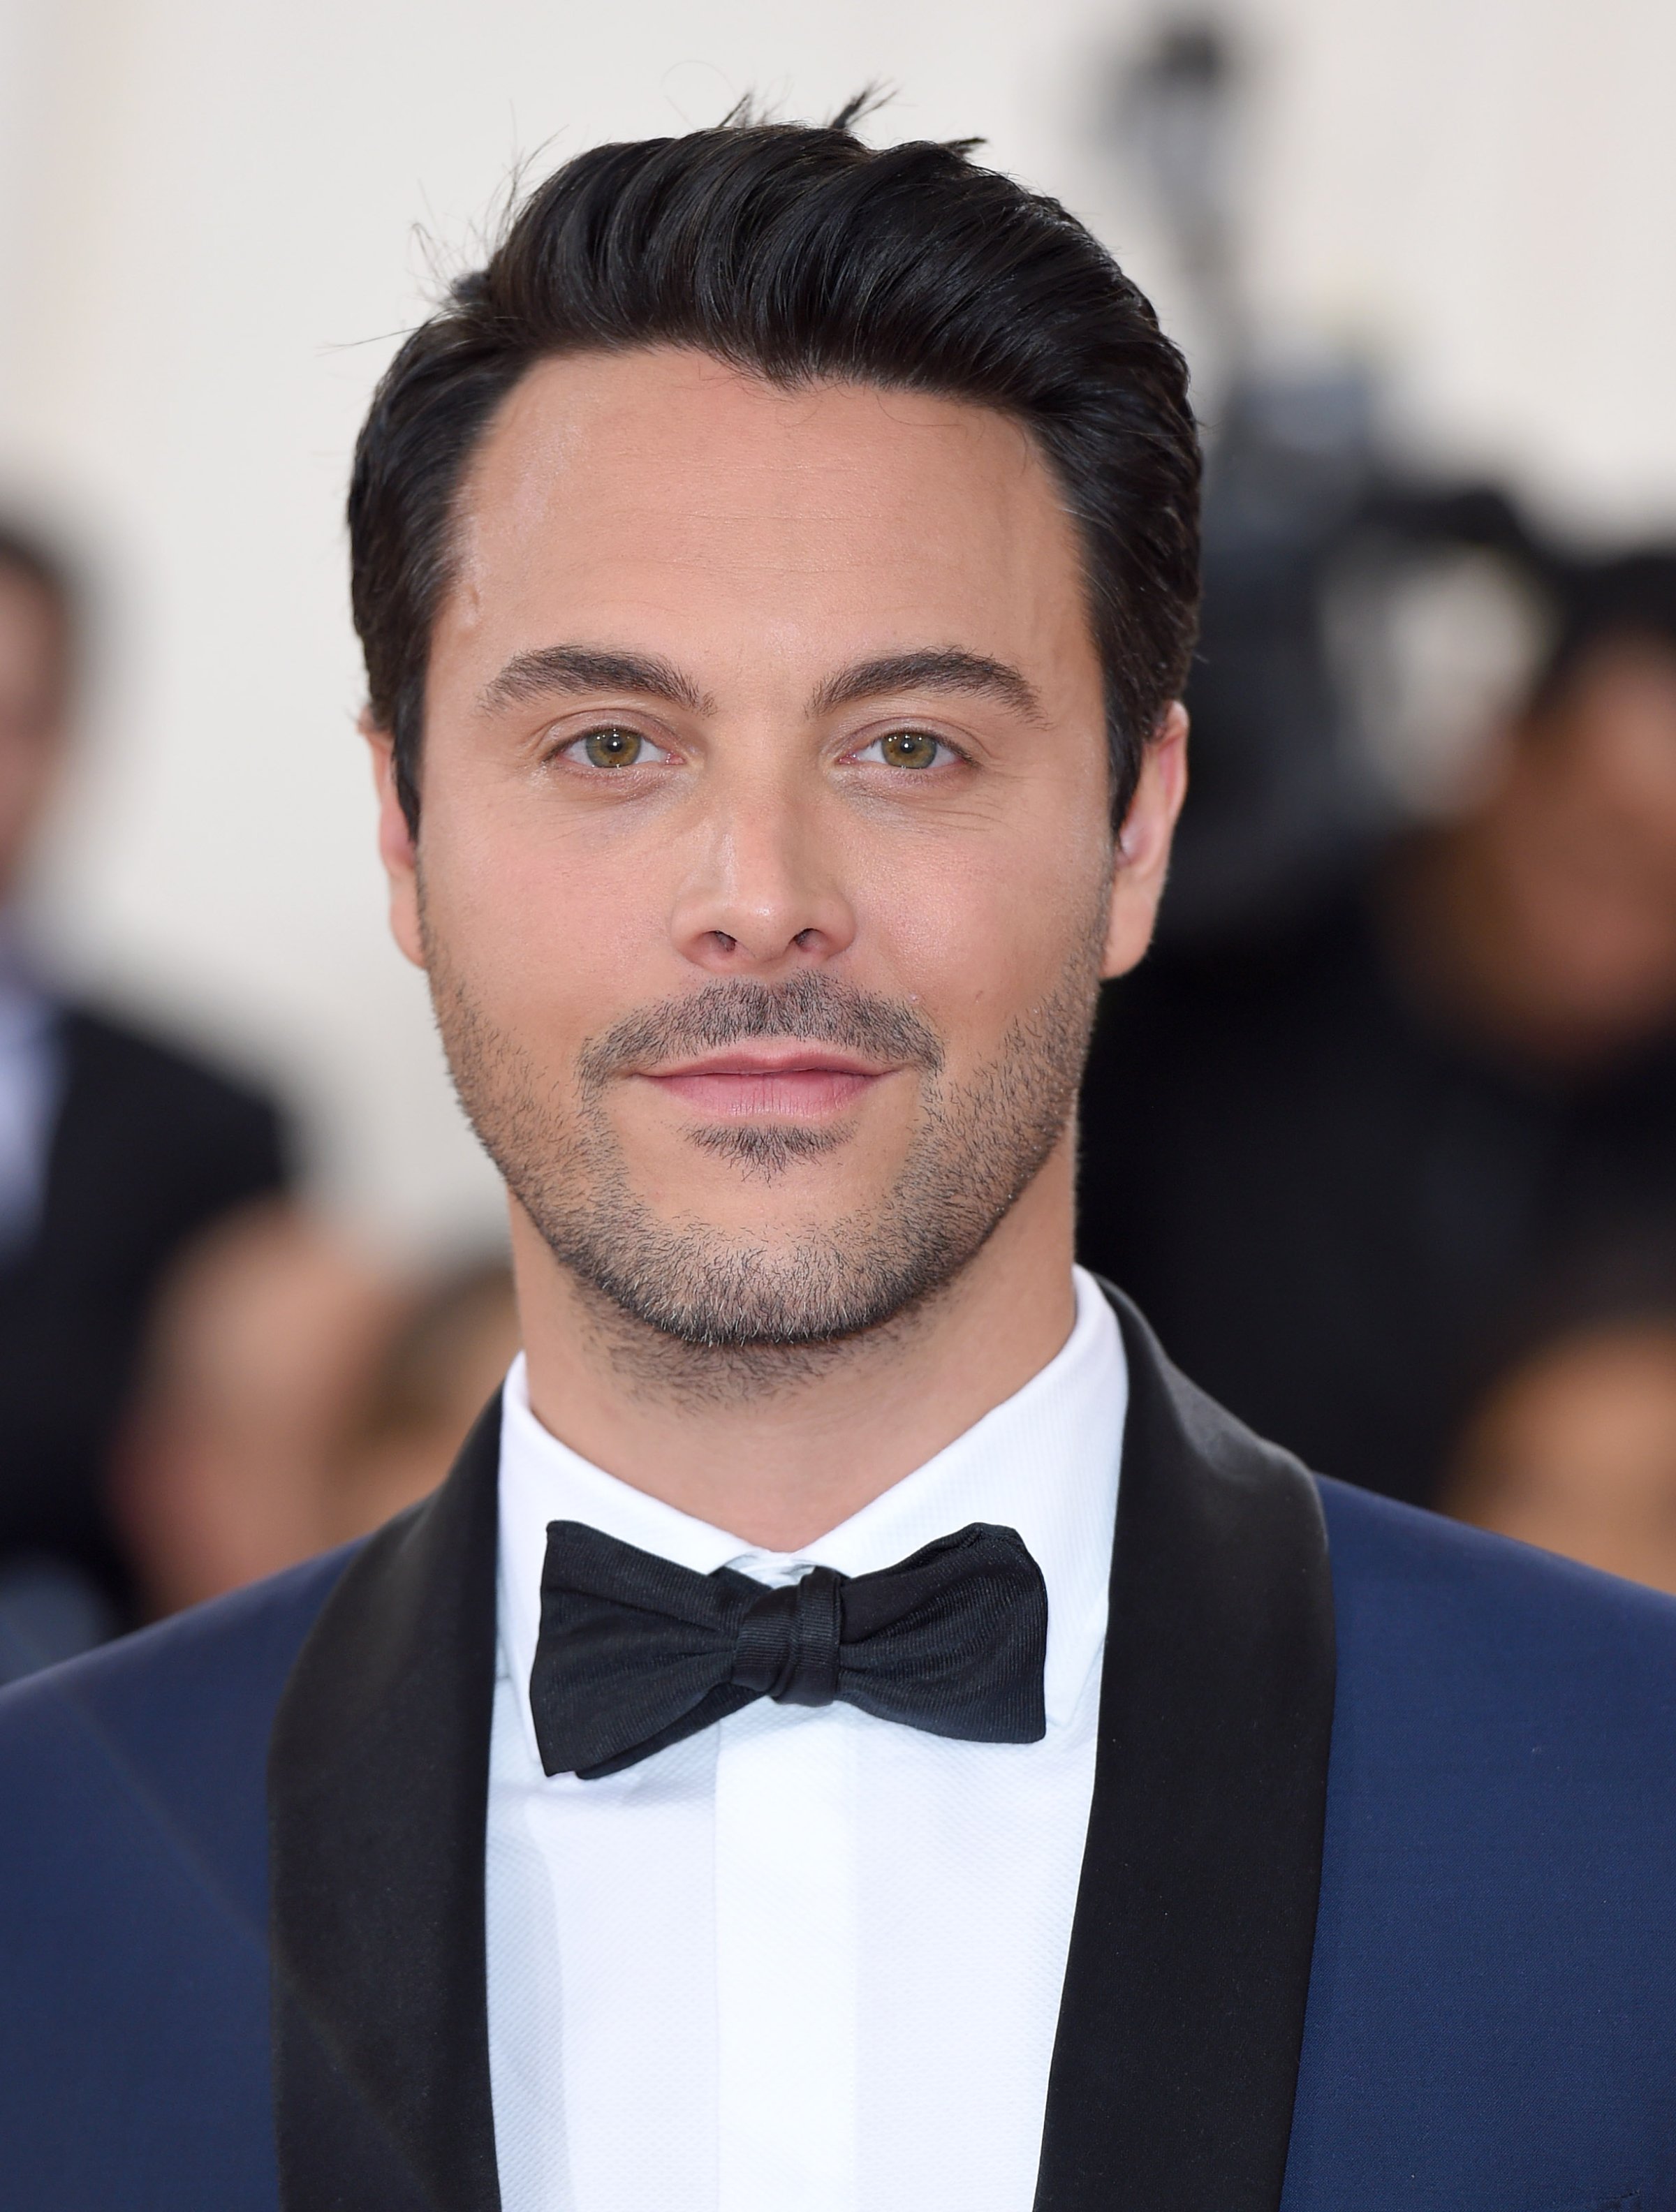 Jack Huston arrives for the Costume Institute Gala at Metropolitan Museum of Art on May 2, 2016 in New York City.